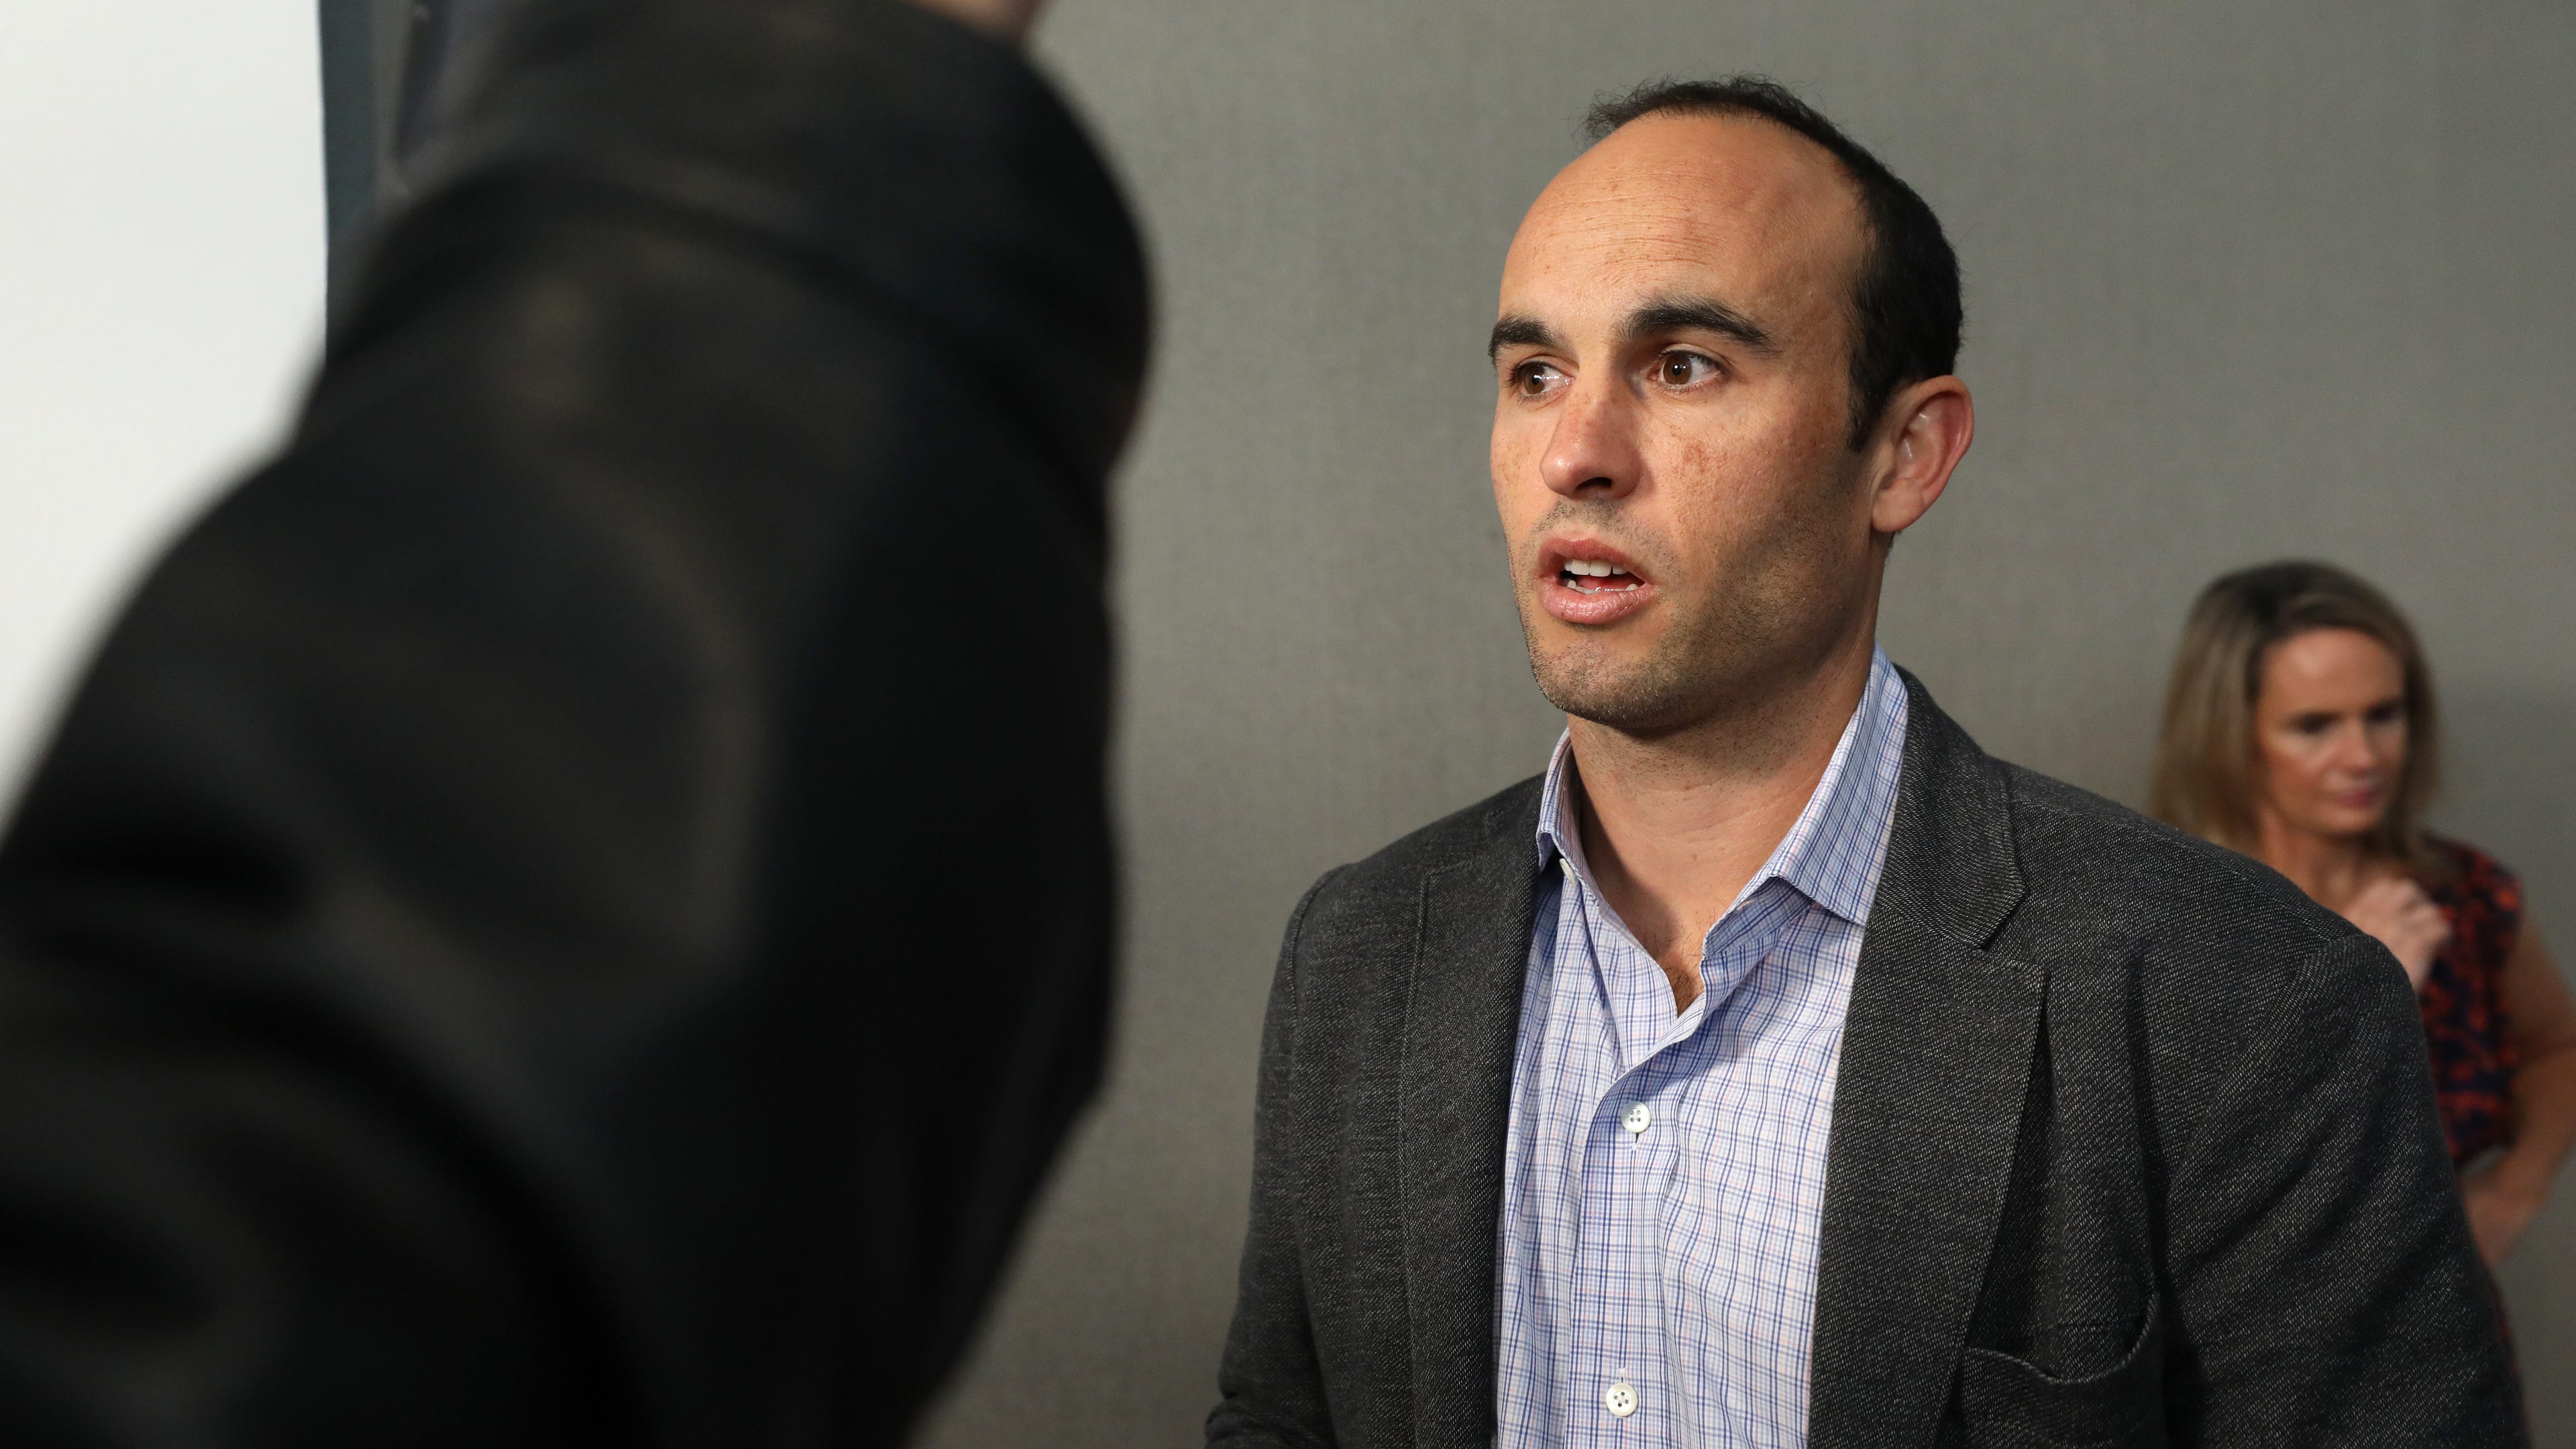 Not everyone's the star': Inside Landon Donovan's decision to coach the  USL's San Diego Loyal